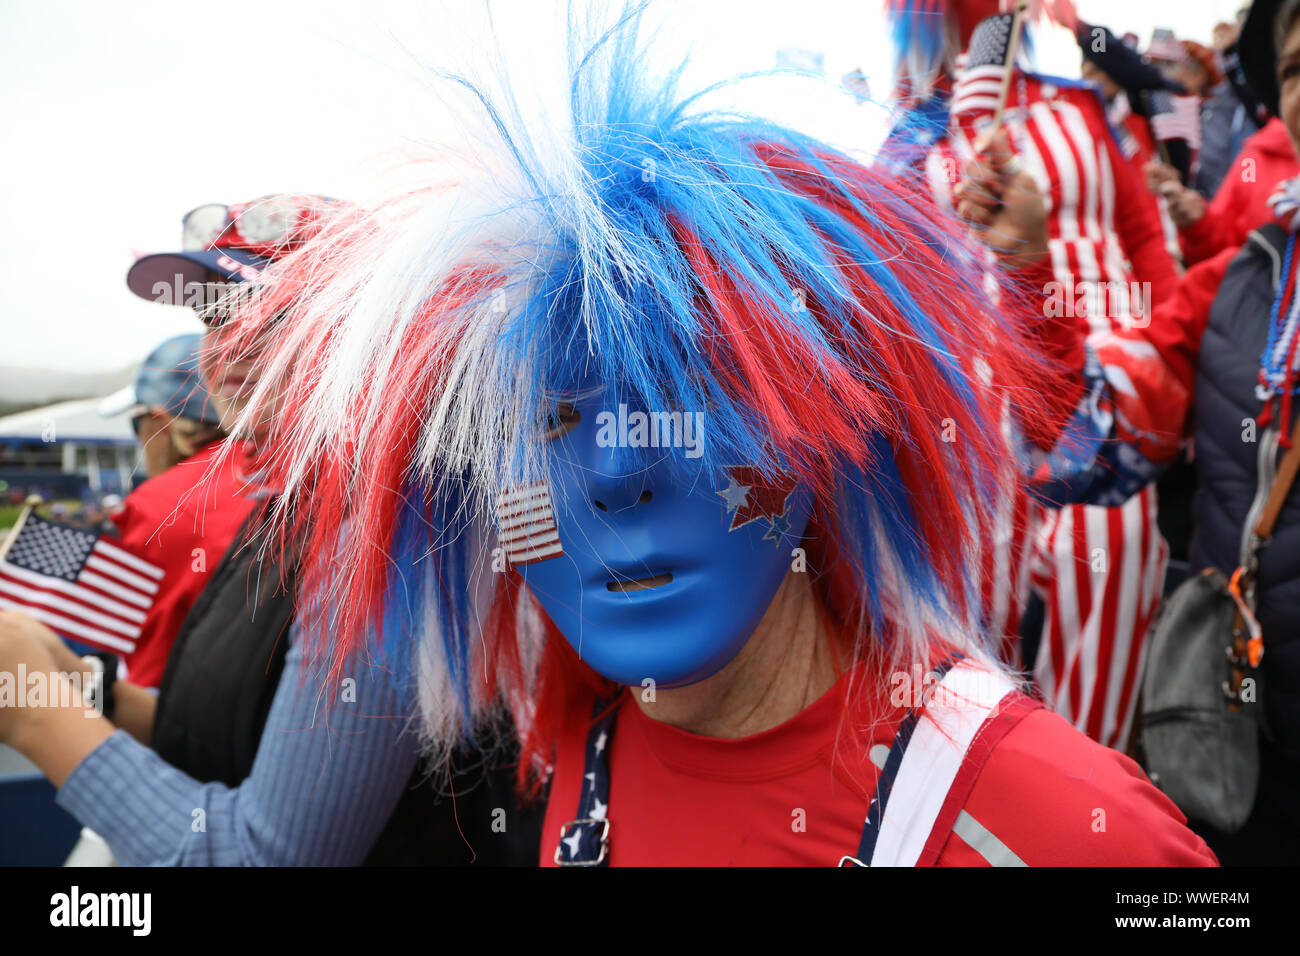 Gleneagles, UK. 15 September 2019. On the final day of the Solheim Cup Ladies Golf tournament between Europe and the United States of America held over the PGA centenary course, Gleneagles, Scotland, many of the supporters came out in fancy costumes and face paint to show support for their respective teams. In the end, Europe won the competition and took the Cup by 14 1/2 points to 13 1/2. Credit: Findlay/ Alamy News Stock Photo